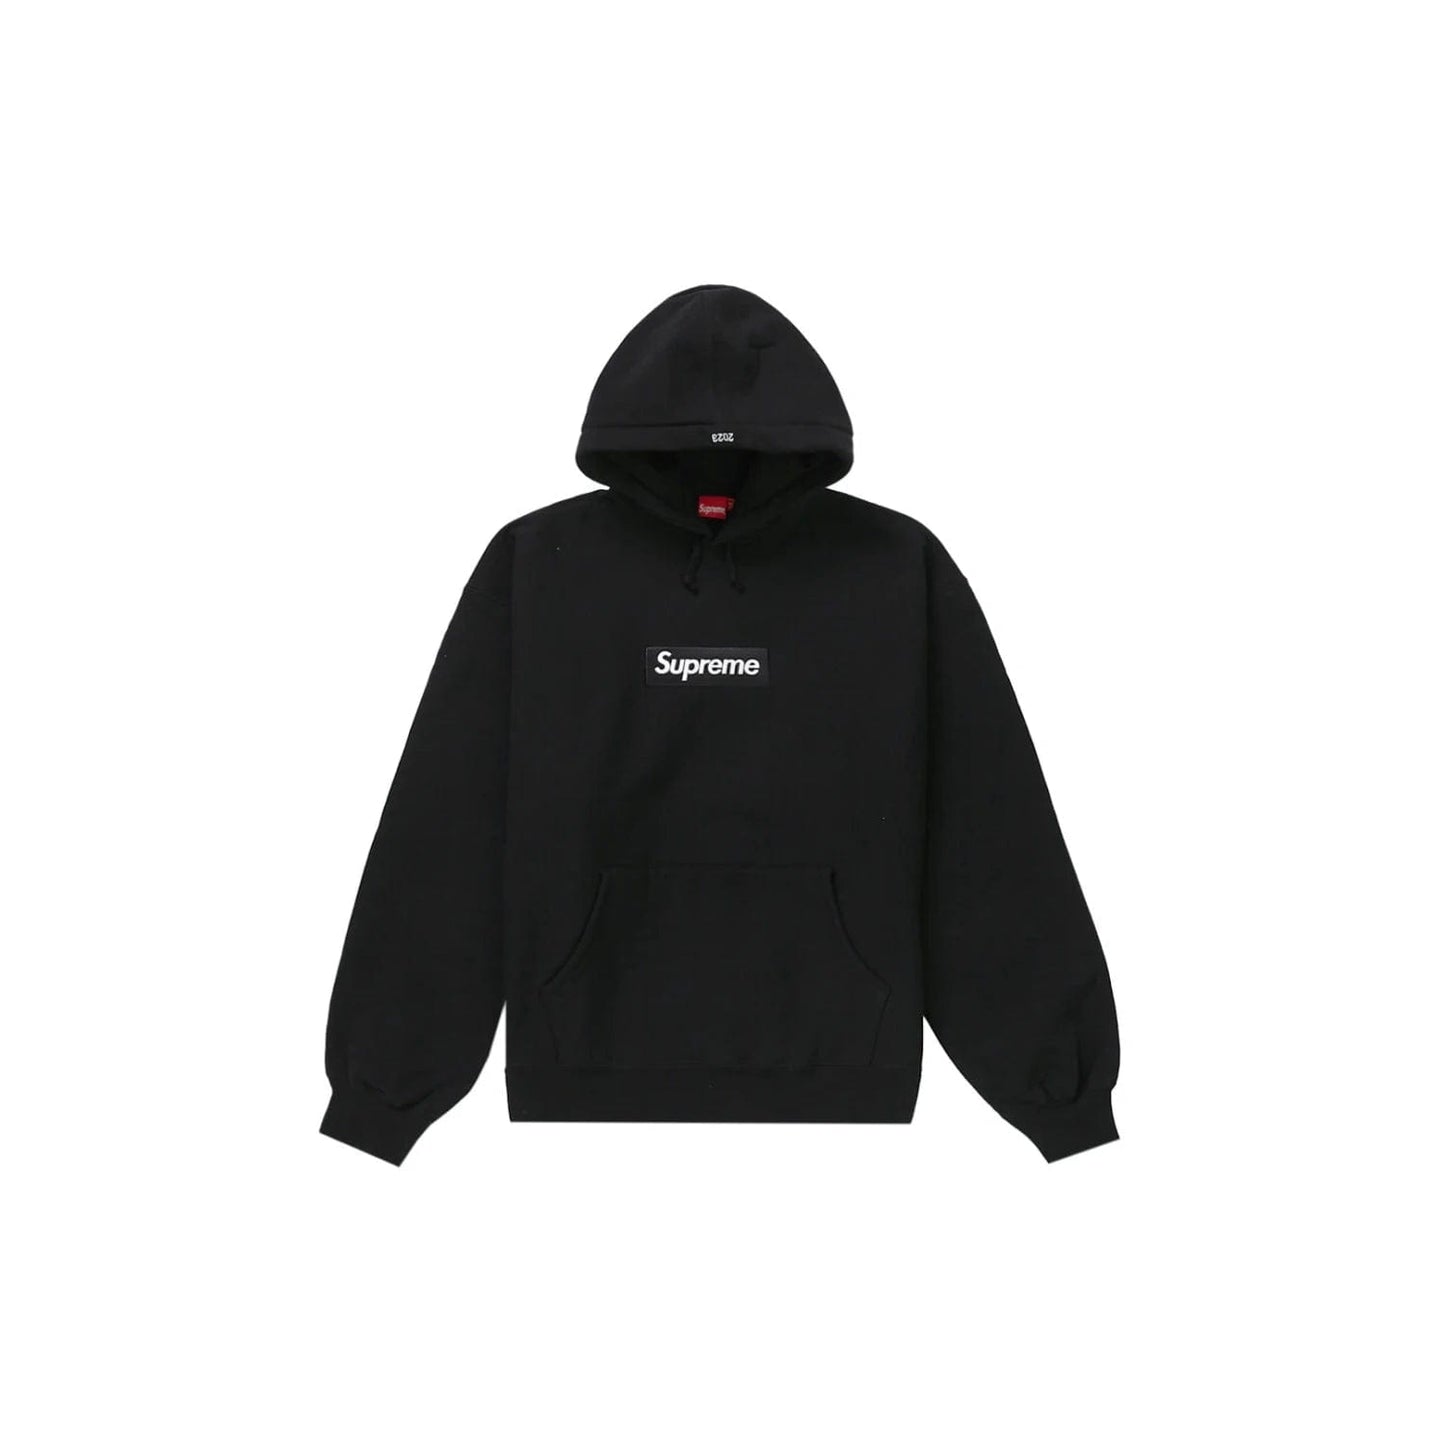 Supreme Box Logo Hooded Sweatshirt (FW23) Black - Image 1 - Only at www.BallersClubKickz.com - A classic staple with a soft cotton blend and bold box logo print. The Supreme Box Logo Hooded Sweatshirt (FW23) is perfect for any street style look. Adjustable drawstrings for comfortable fit. Timeless design.